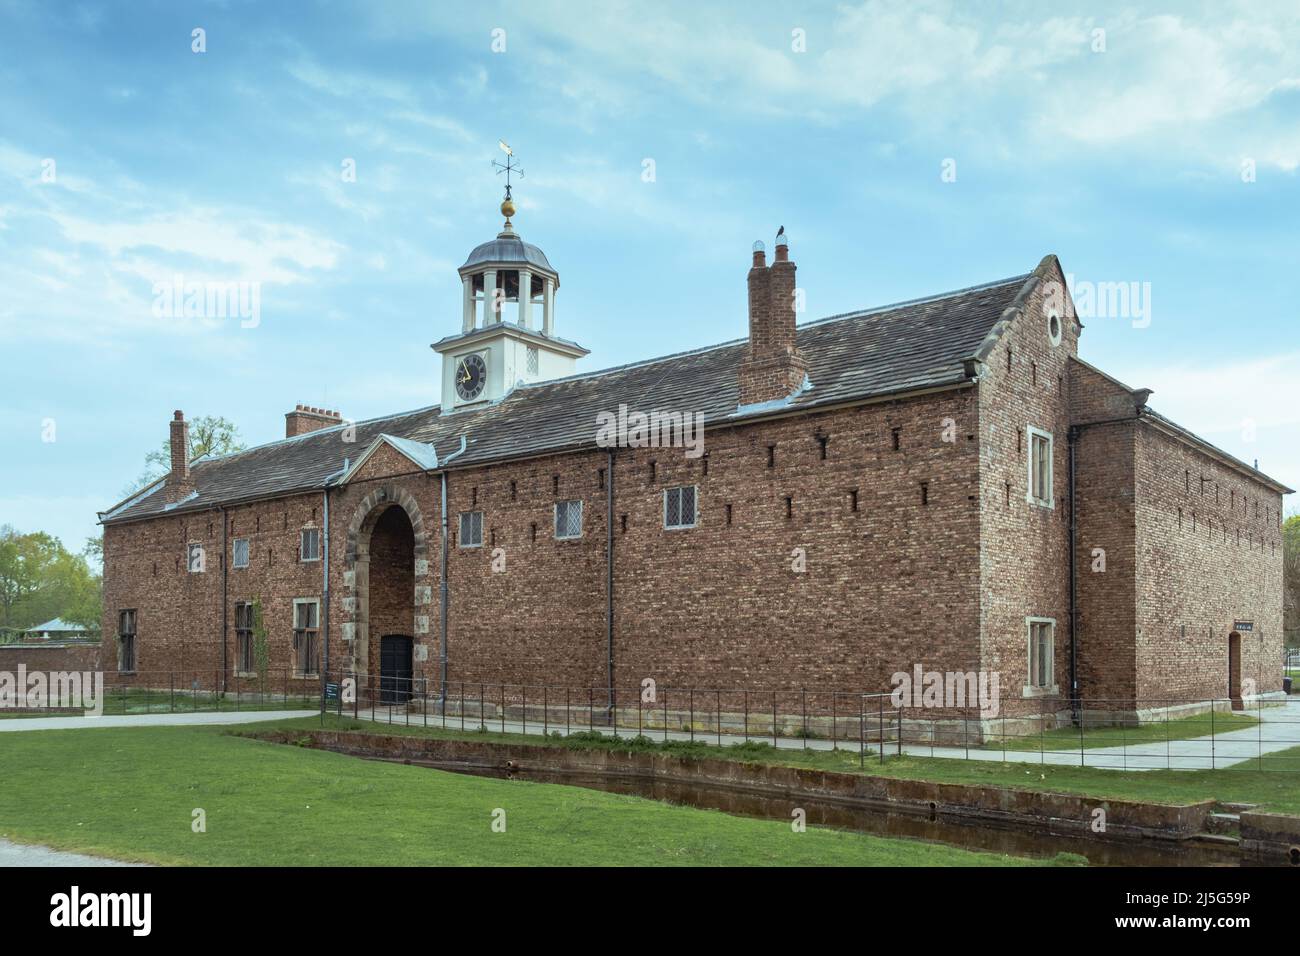 Dunham Massey Hall and Gardens - Coach House - Carriage House - Courtyard - National Trust Stockfoto